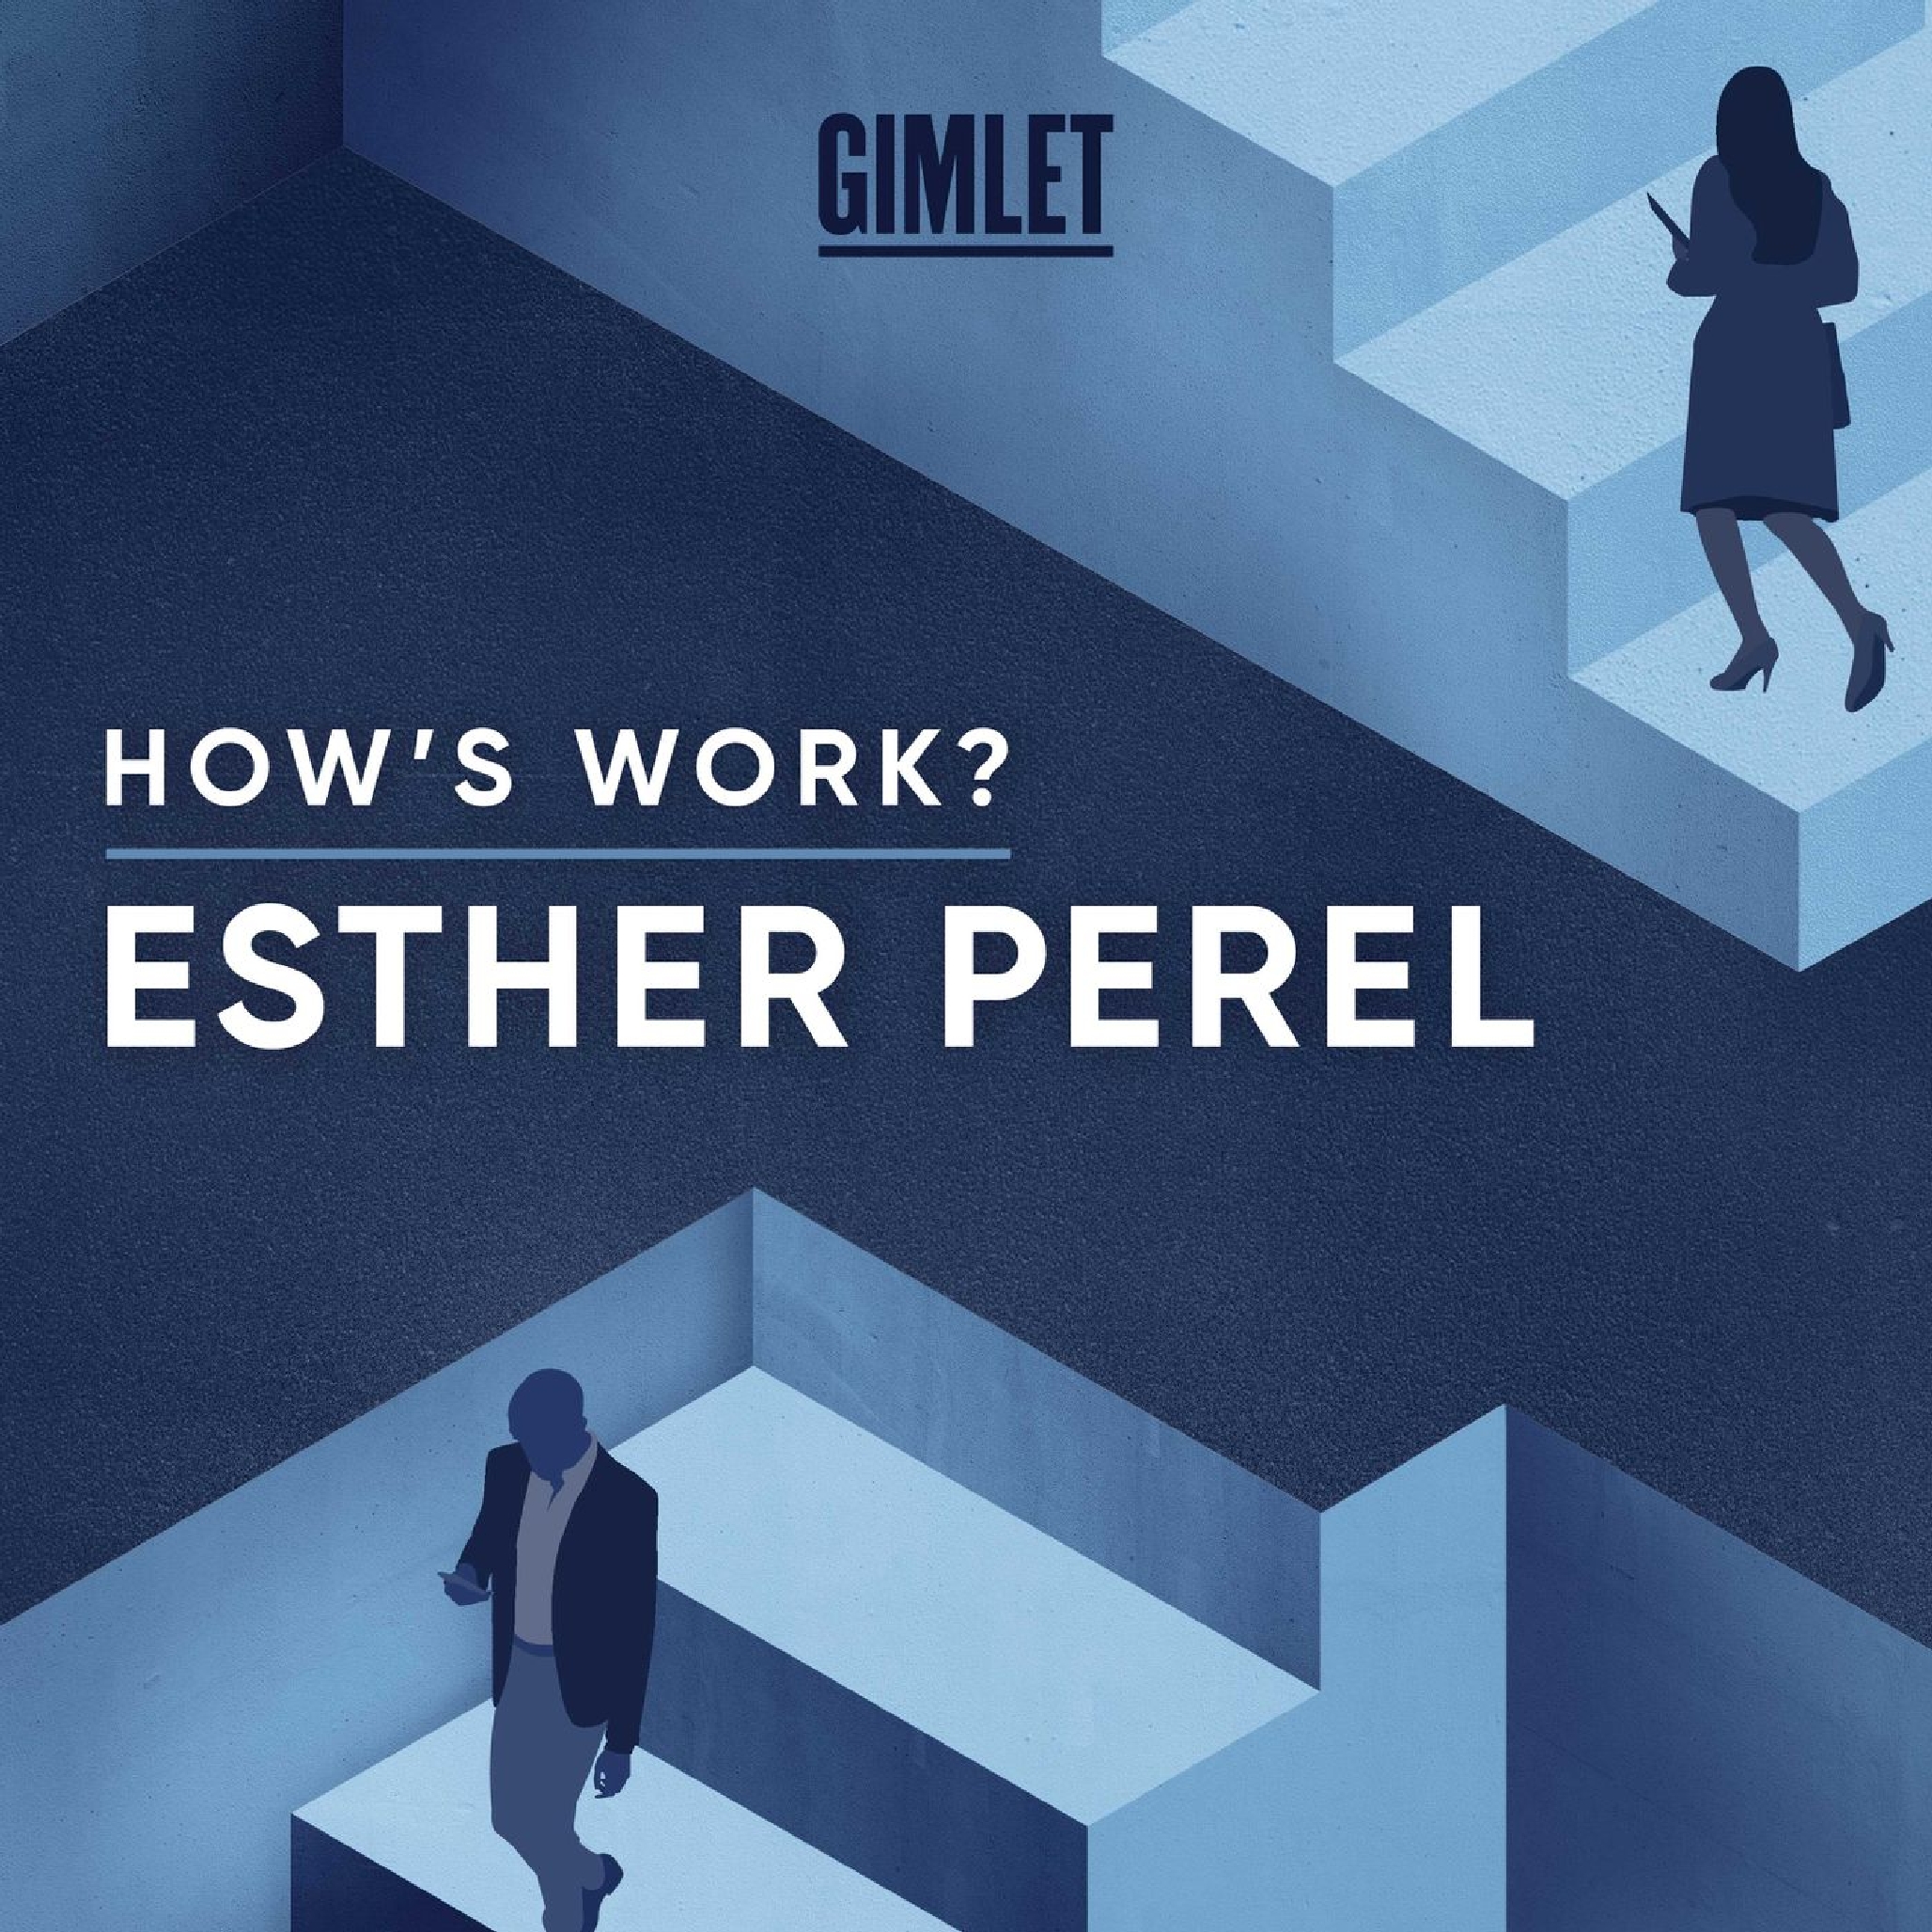 Esther Perel's new podcast debuted in November 2019 as a Spotify exclusive. It will be available on other platforms starting in February 2020.